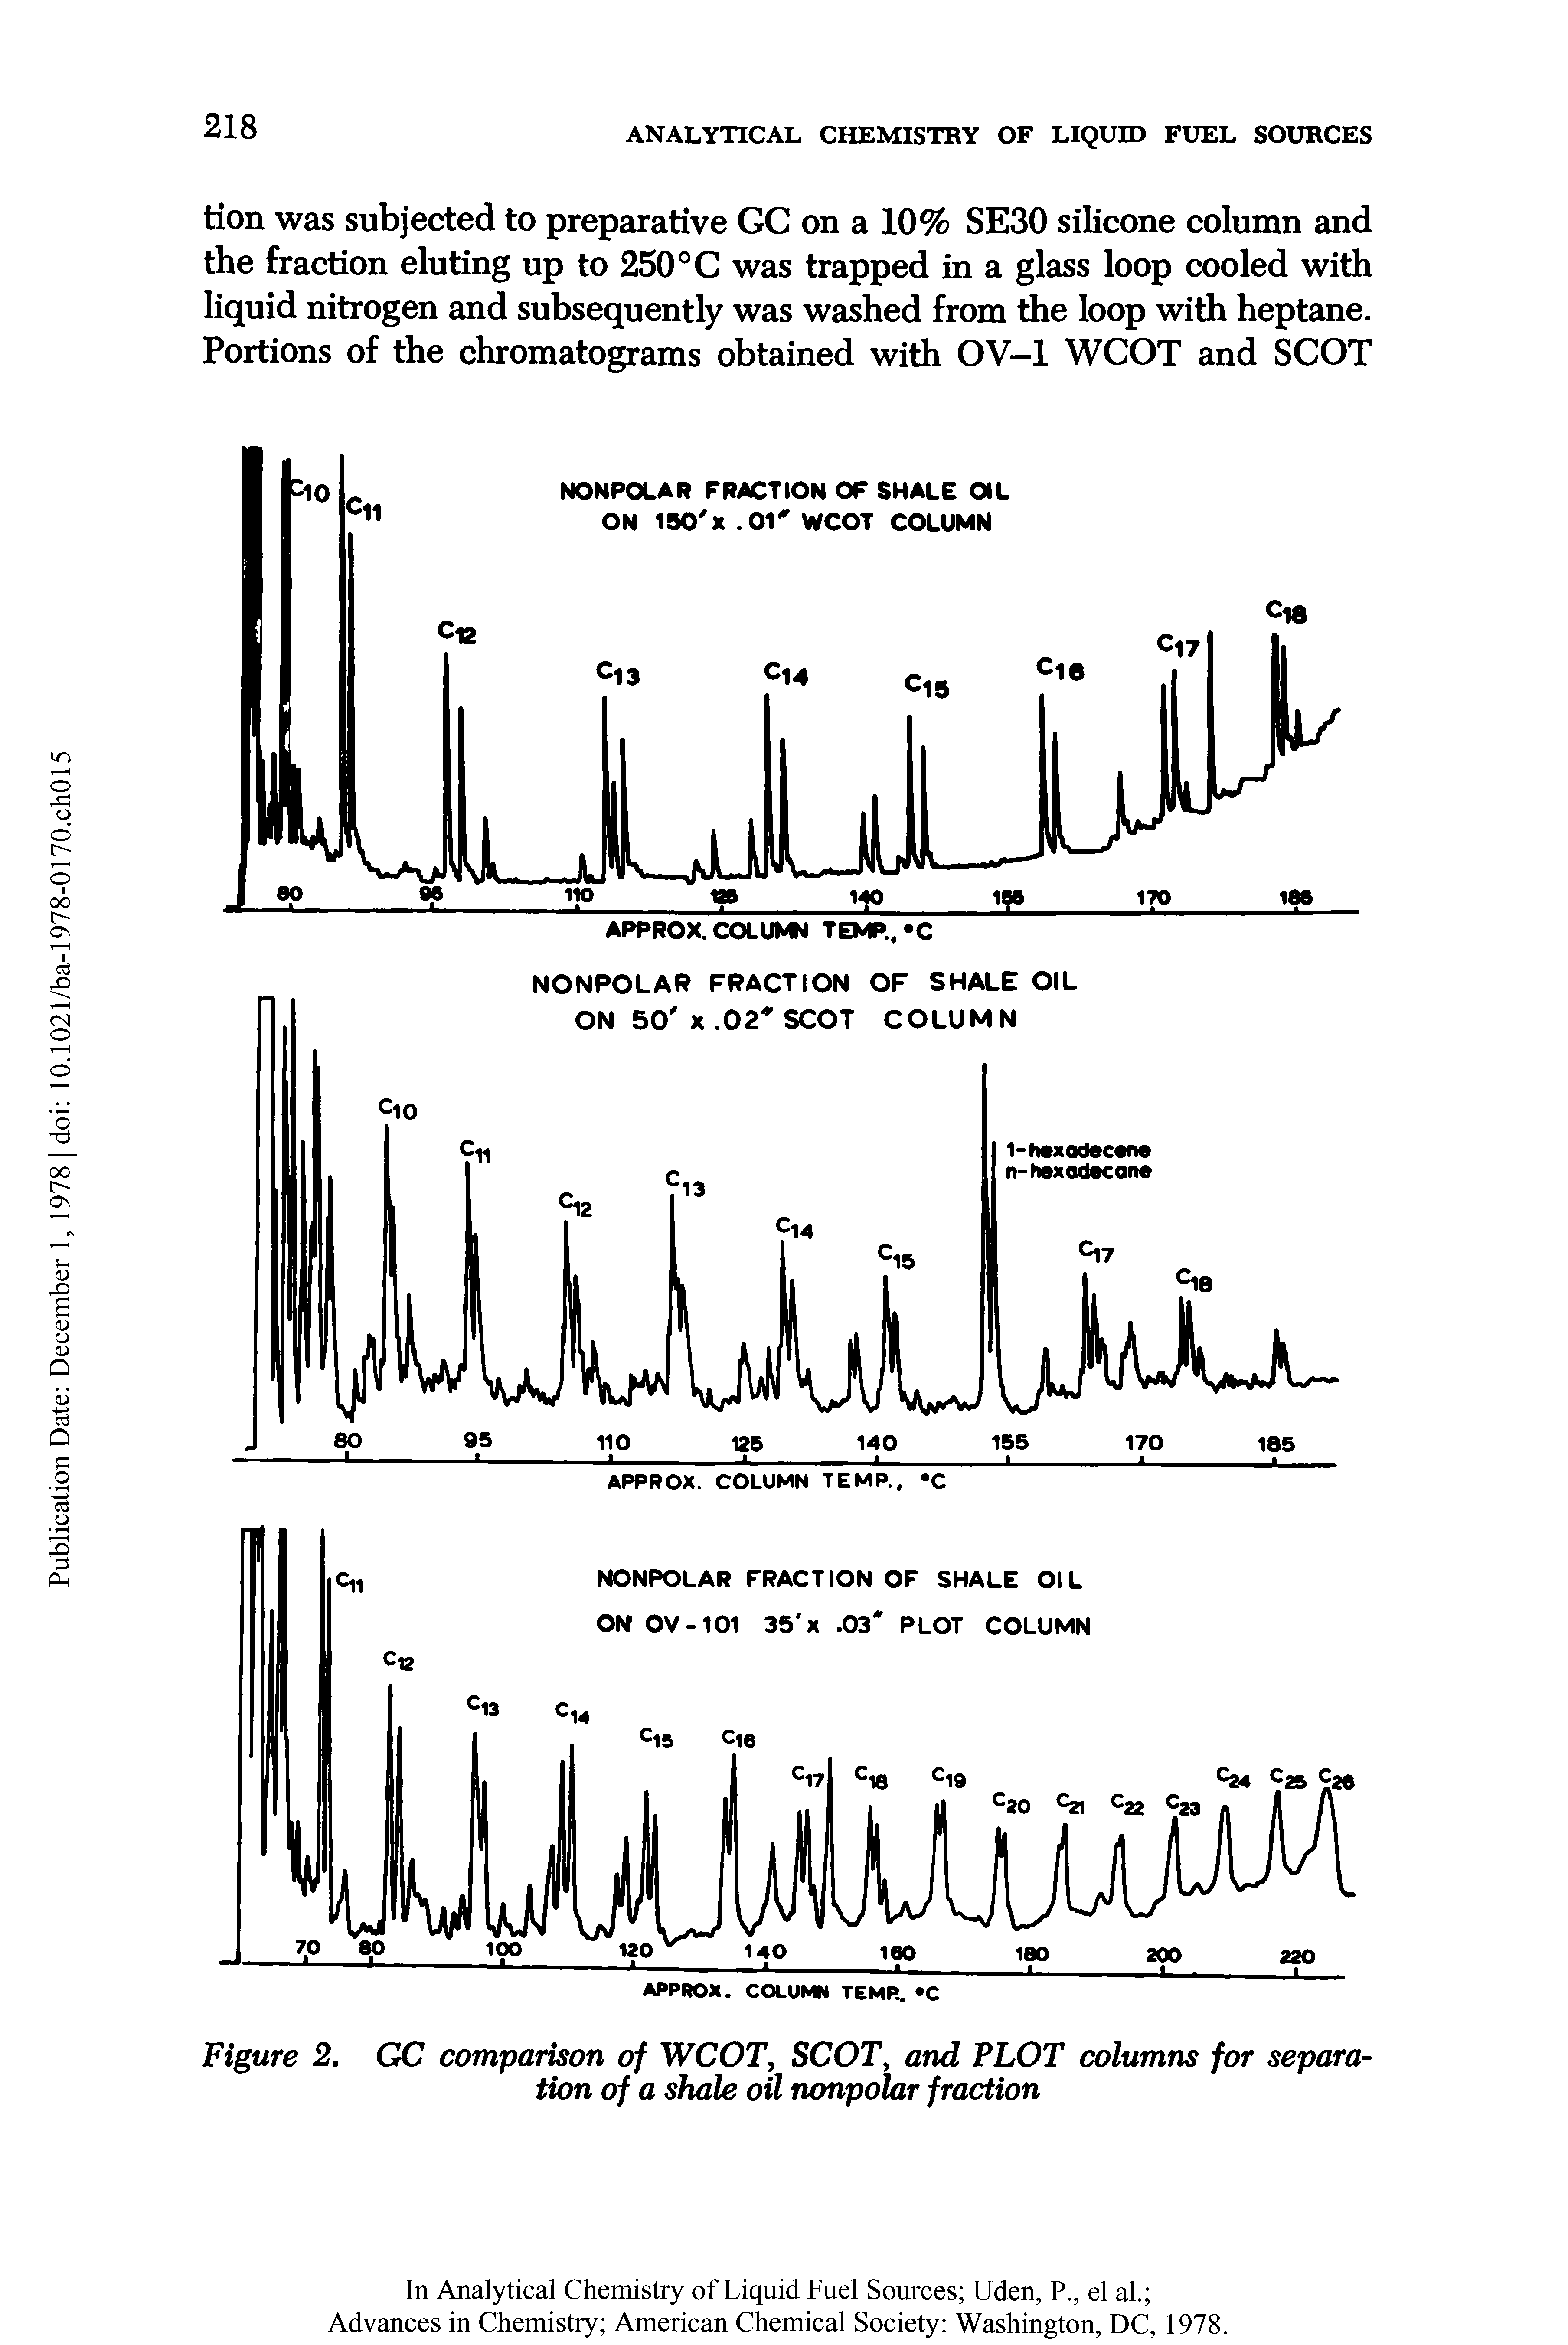 Figure 2, GC comparison of WCOT, SCOT, and PLOT columns for separation of a shah oil nonpolar fraction...